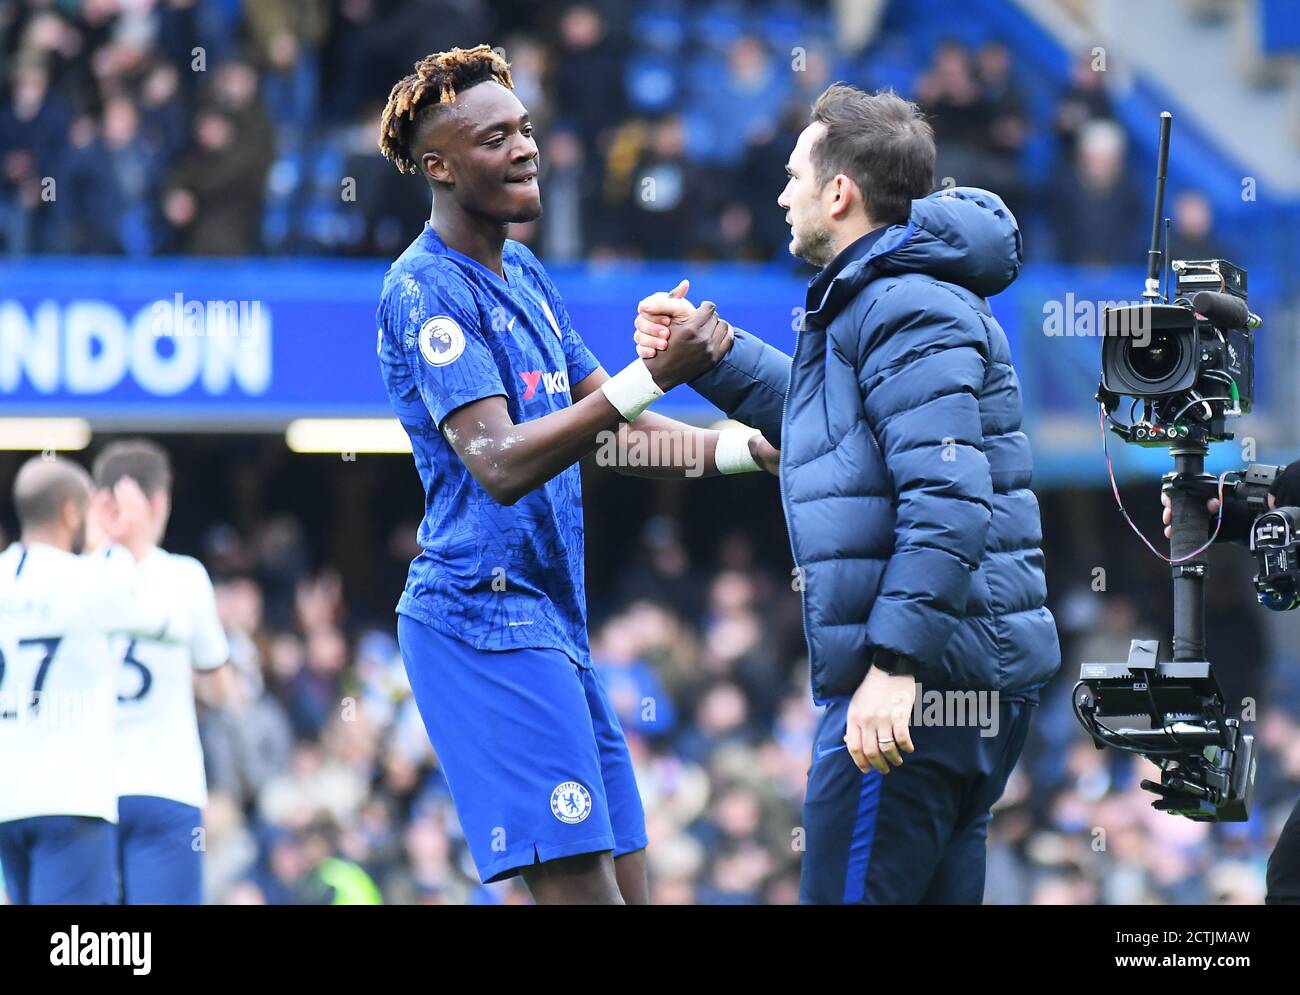 LONDON, ENGLAND - FEBRUARY 22, 2020: Tammy Abraham of Chelsea and Chelsea manager Frank Lampard pictured at the end of the 2019/20 Premier League game between Chelsea FC and Tottenham Hotspur FC at Stamford Bridge. Stock Photo